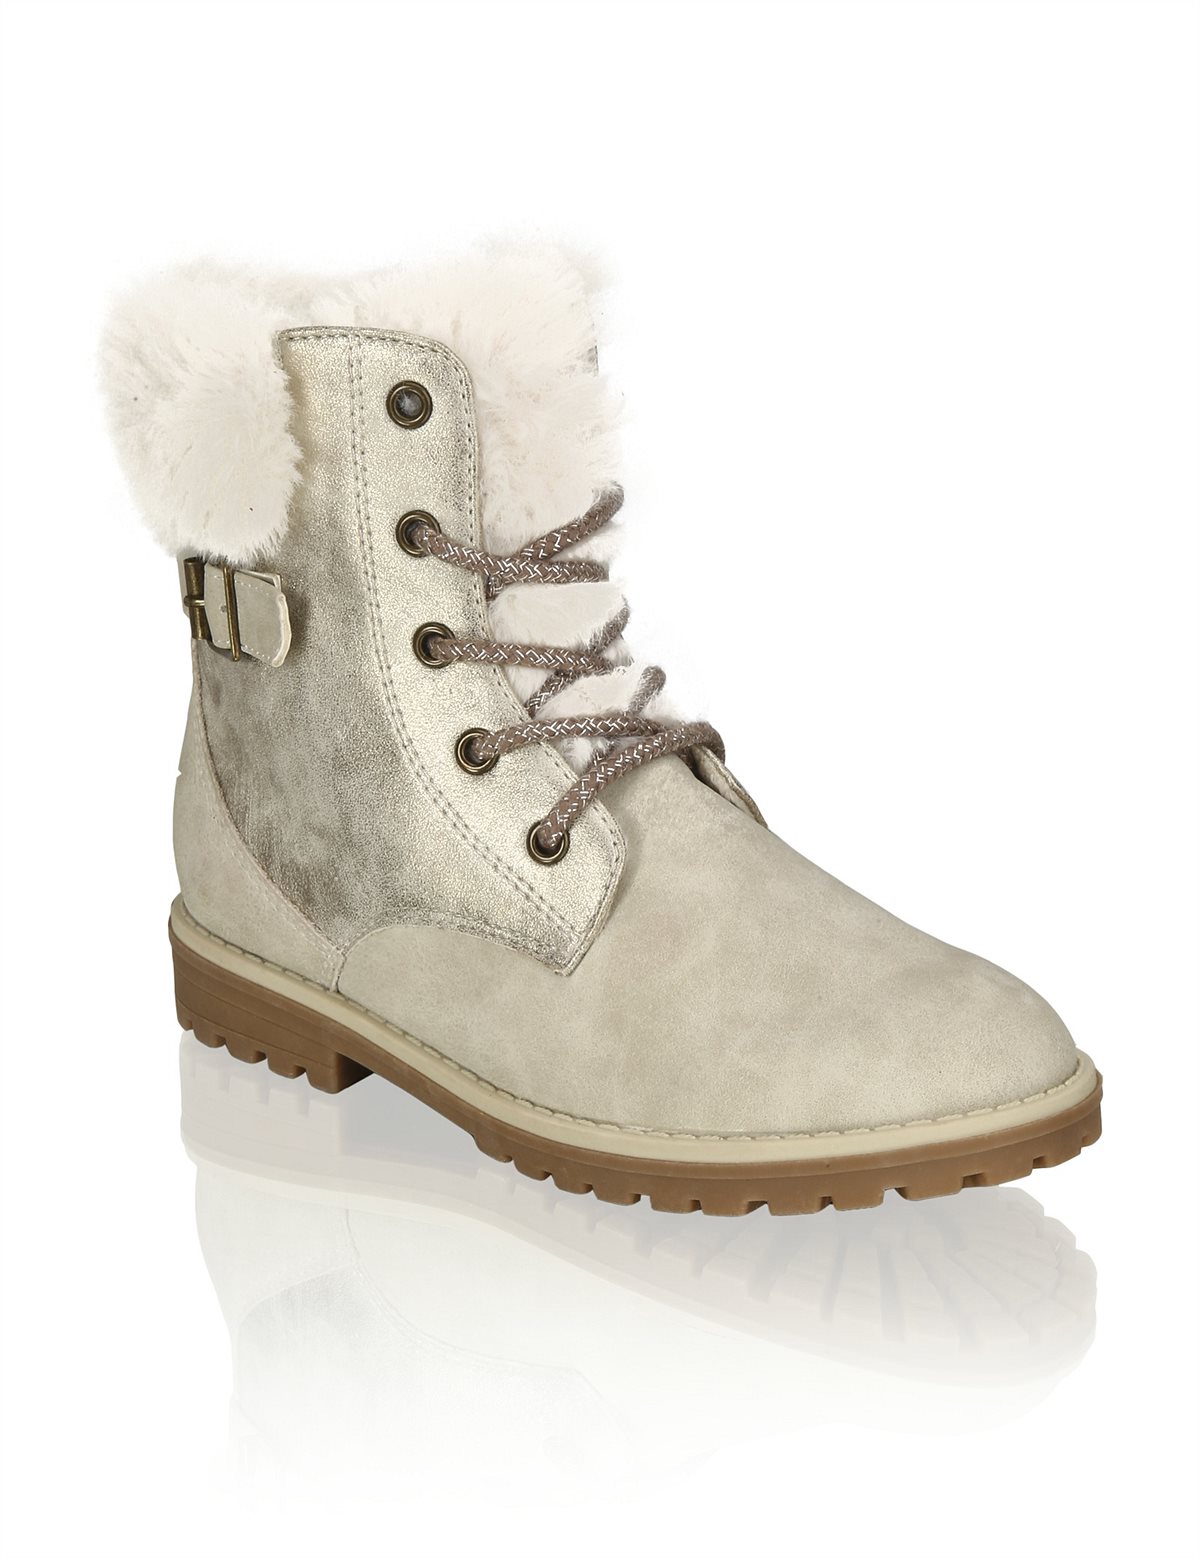 HUMANIC 09 Kids Funky Girls Boot ab EUR 39,95 ab Ende August 3623504725